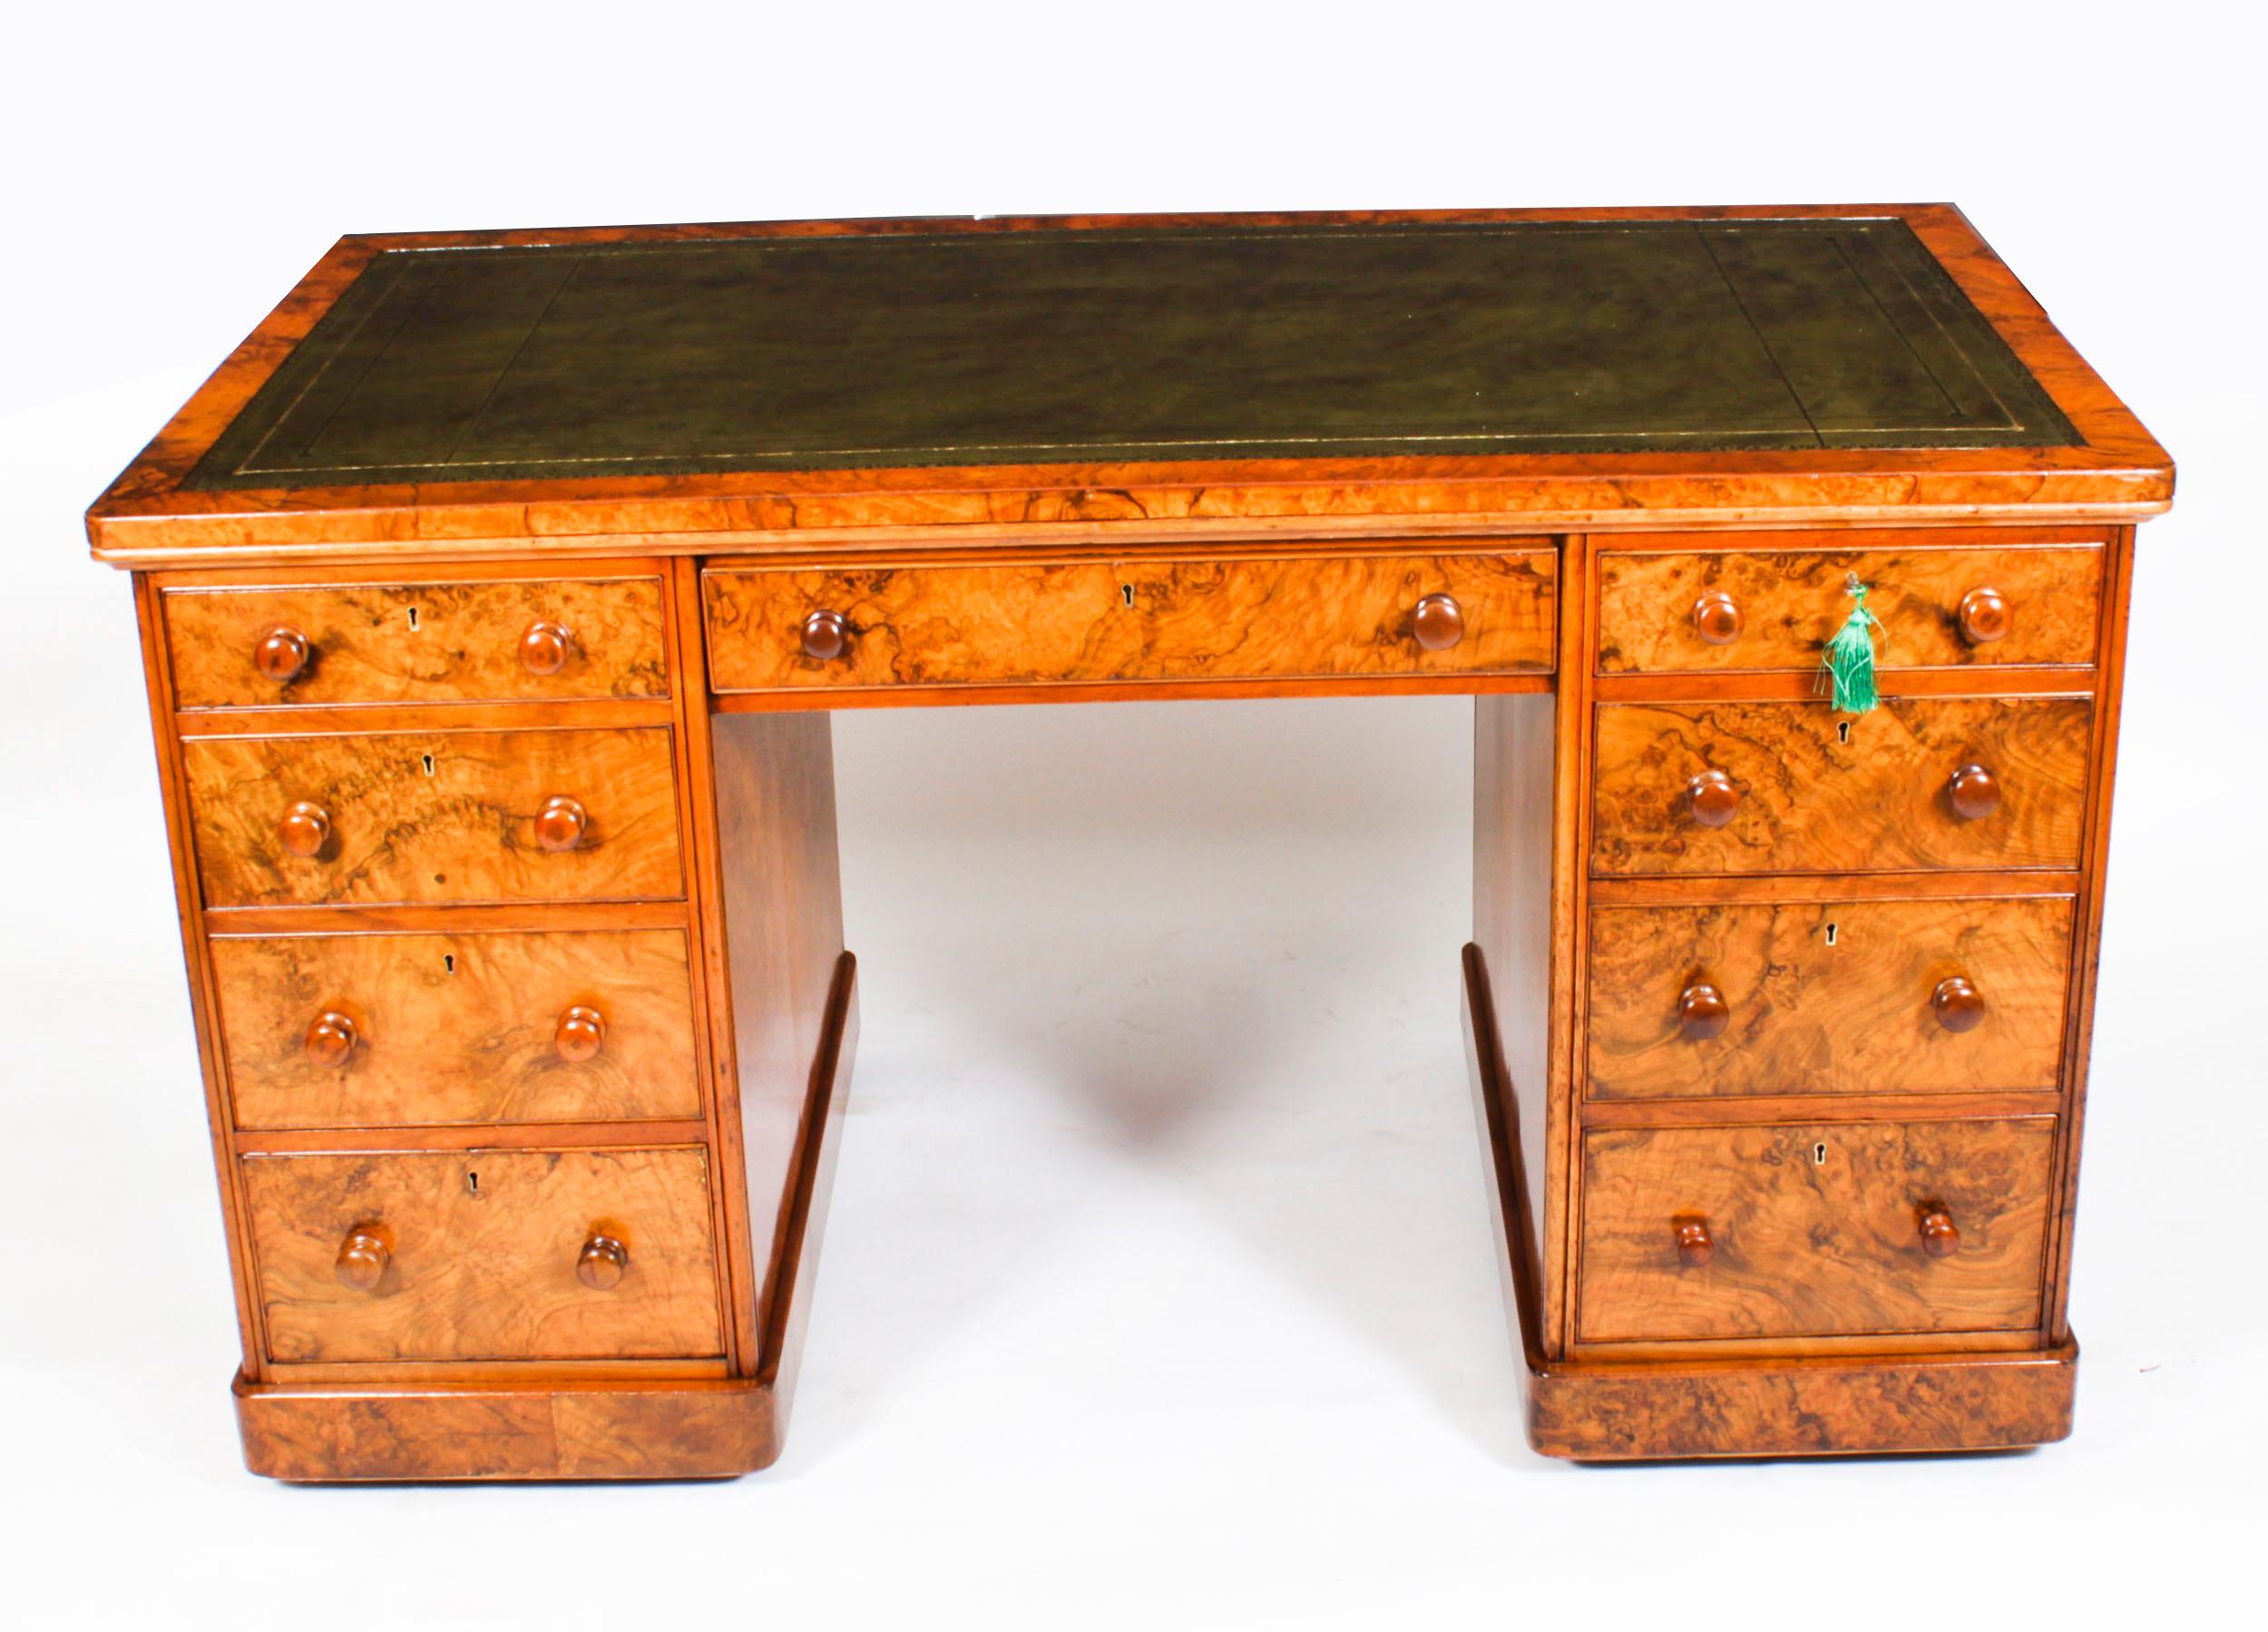 This is a fine and very rare antique Victorian burr walnut twin pedestal partners desk, Circa 1860 in date.
 
It is made from fabulous burr walnut, the rectangular top with a fabulous inset gold tooled green leather writing surface.
 
One side